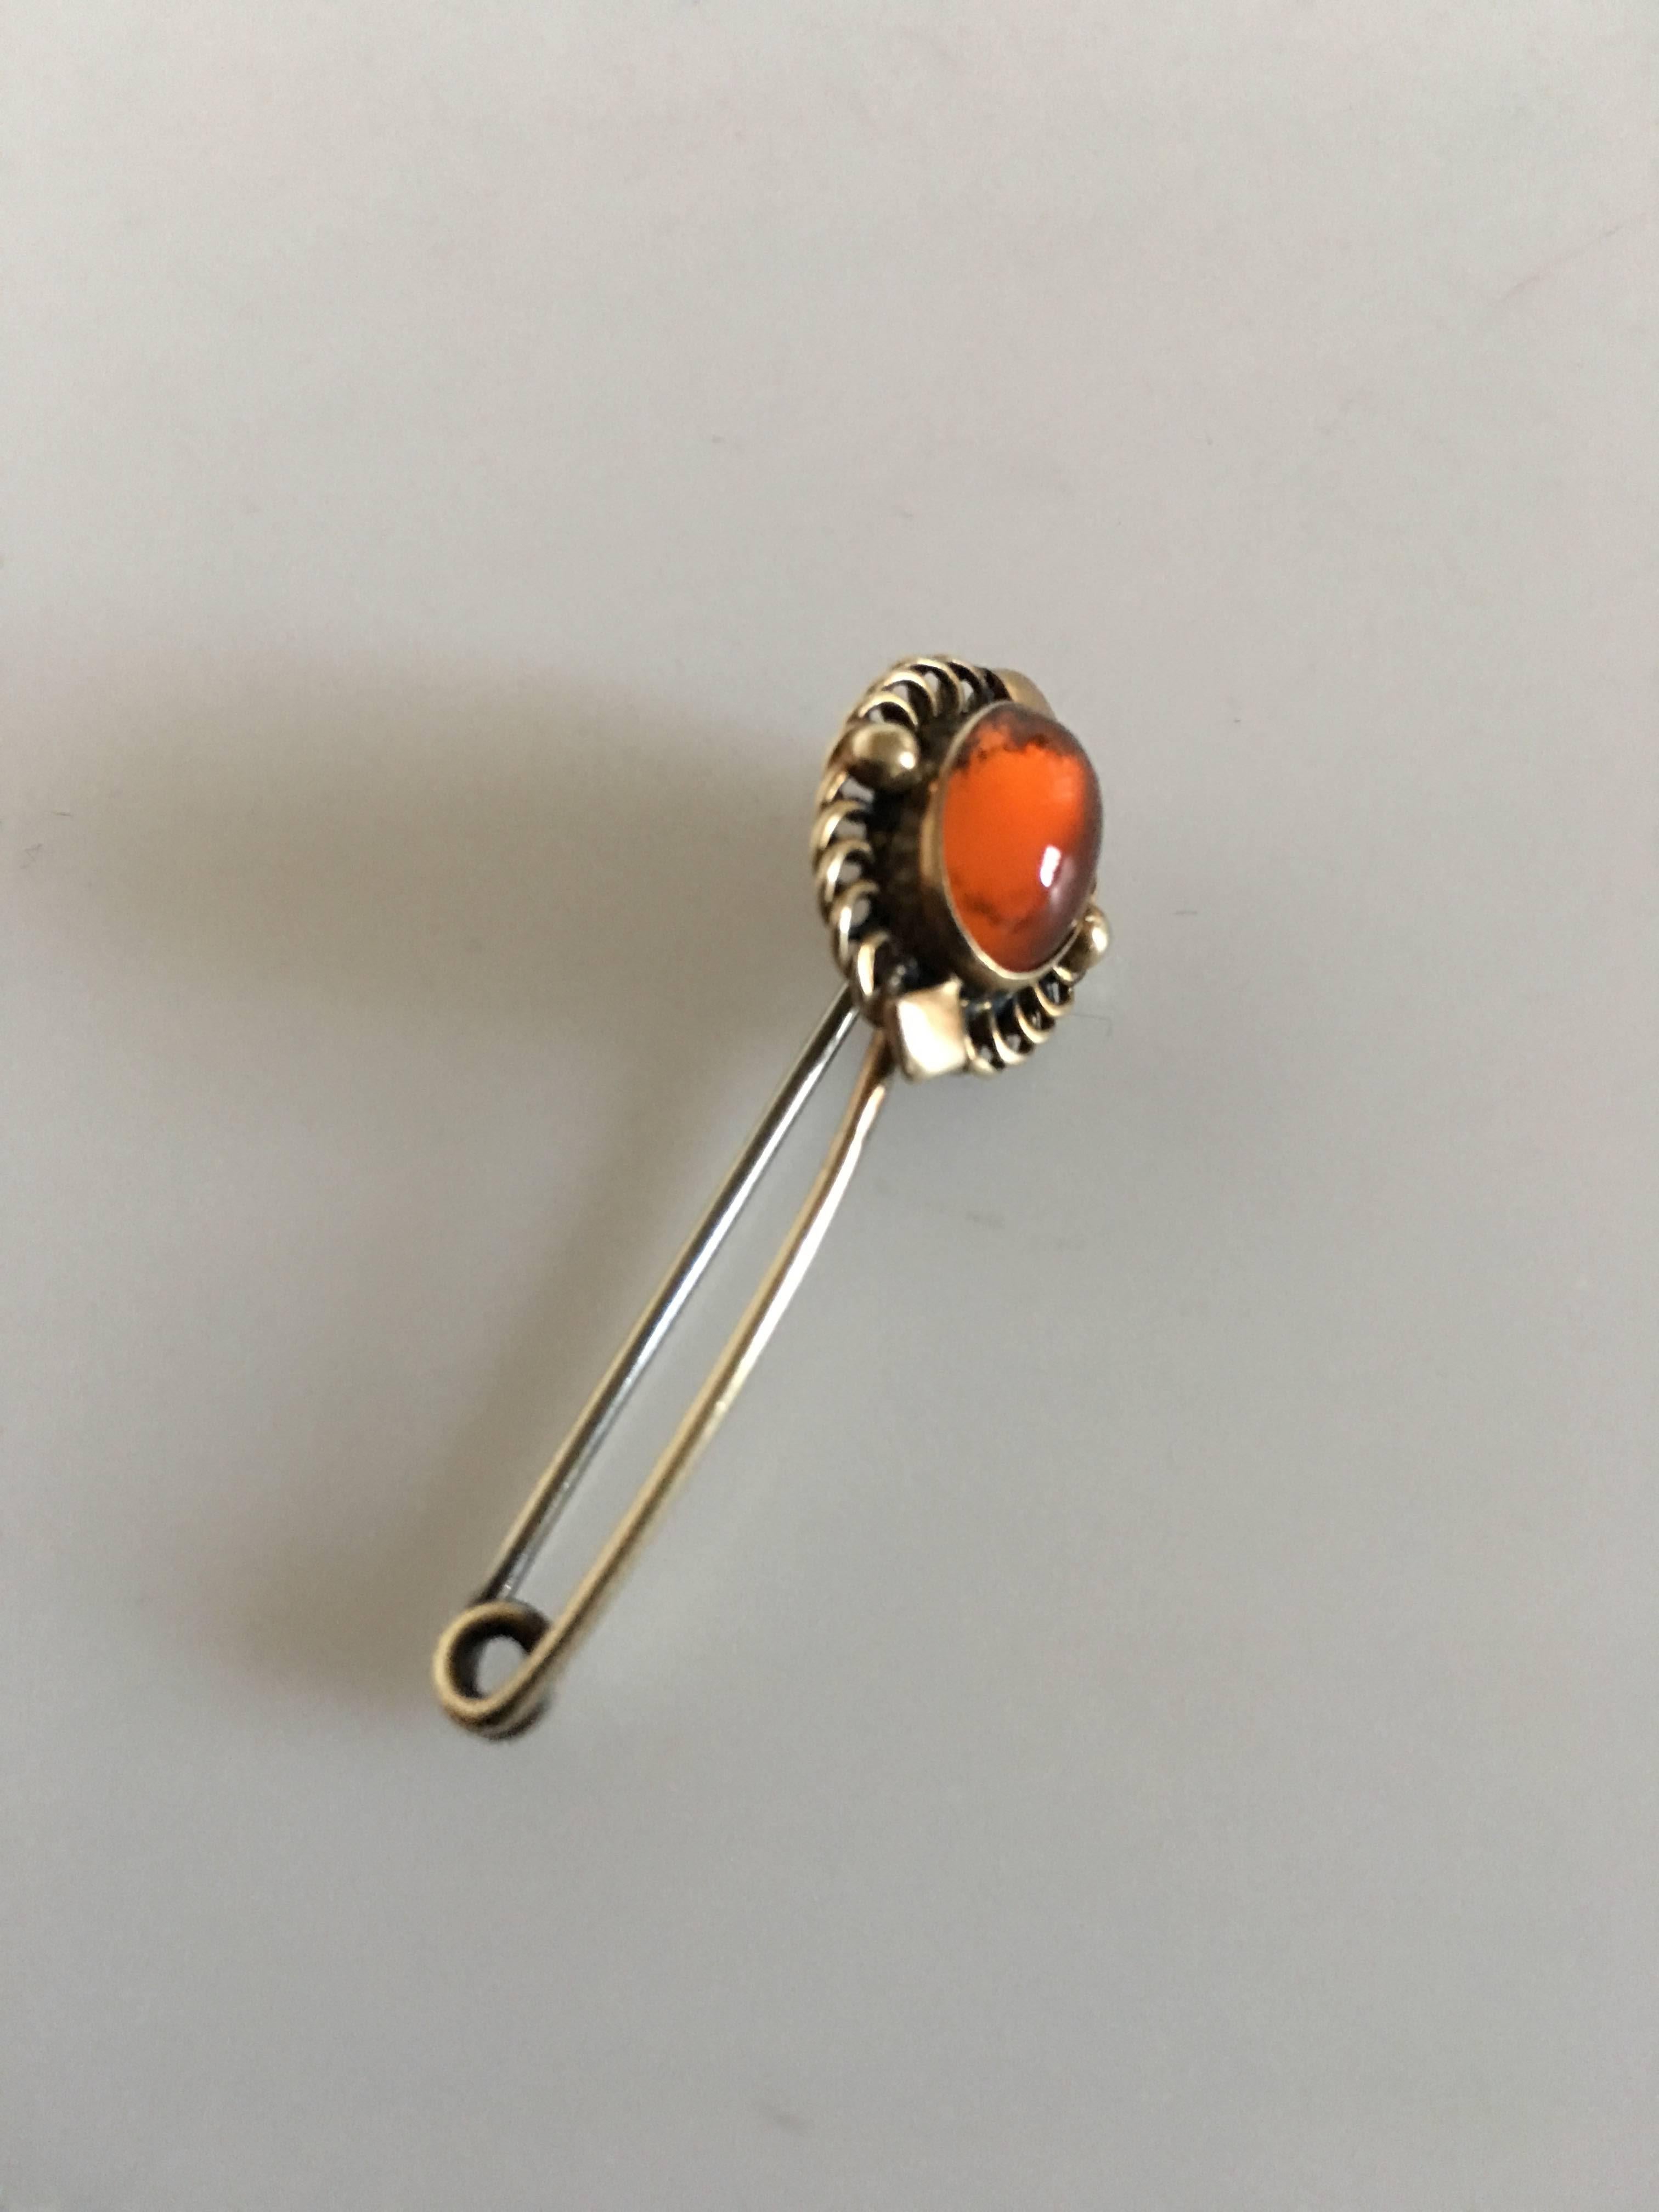 Georg Jensen gilded silver brooch #2 with amber. Made of 830 silver. From 1915-1925. In nice condition. Measures 3.8 cm L (1 1/2